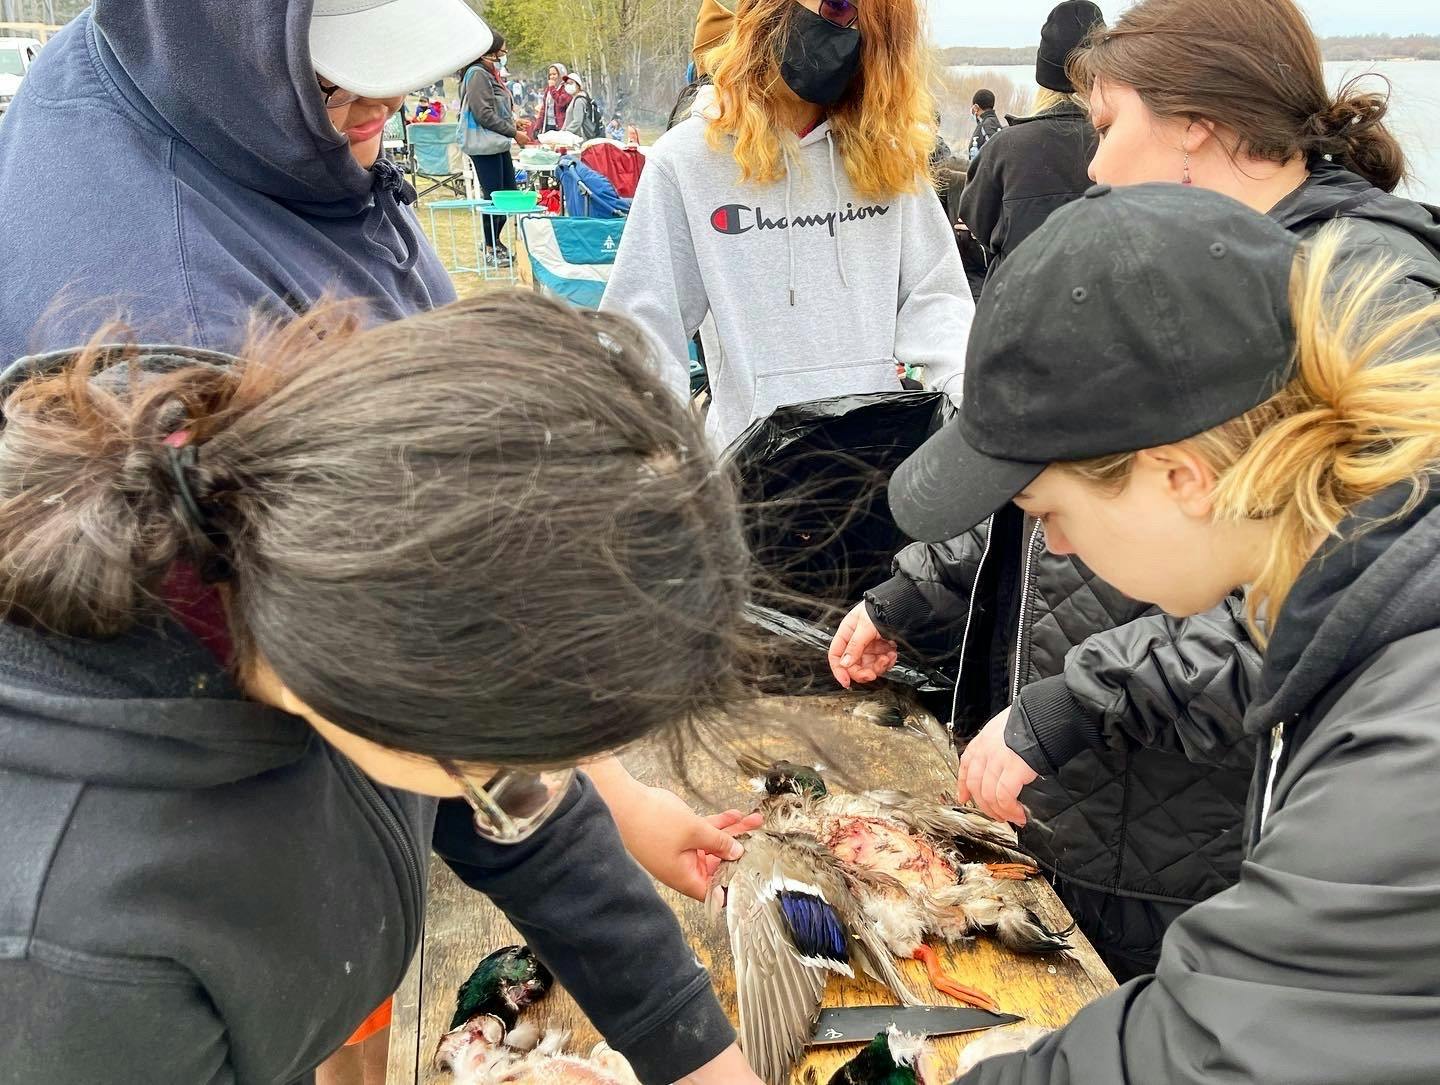 A group of young people wearing outdoor clothing gathers around a butcher's table to defeather a recently killed duck to make soup.